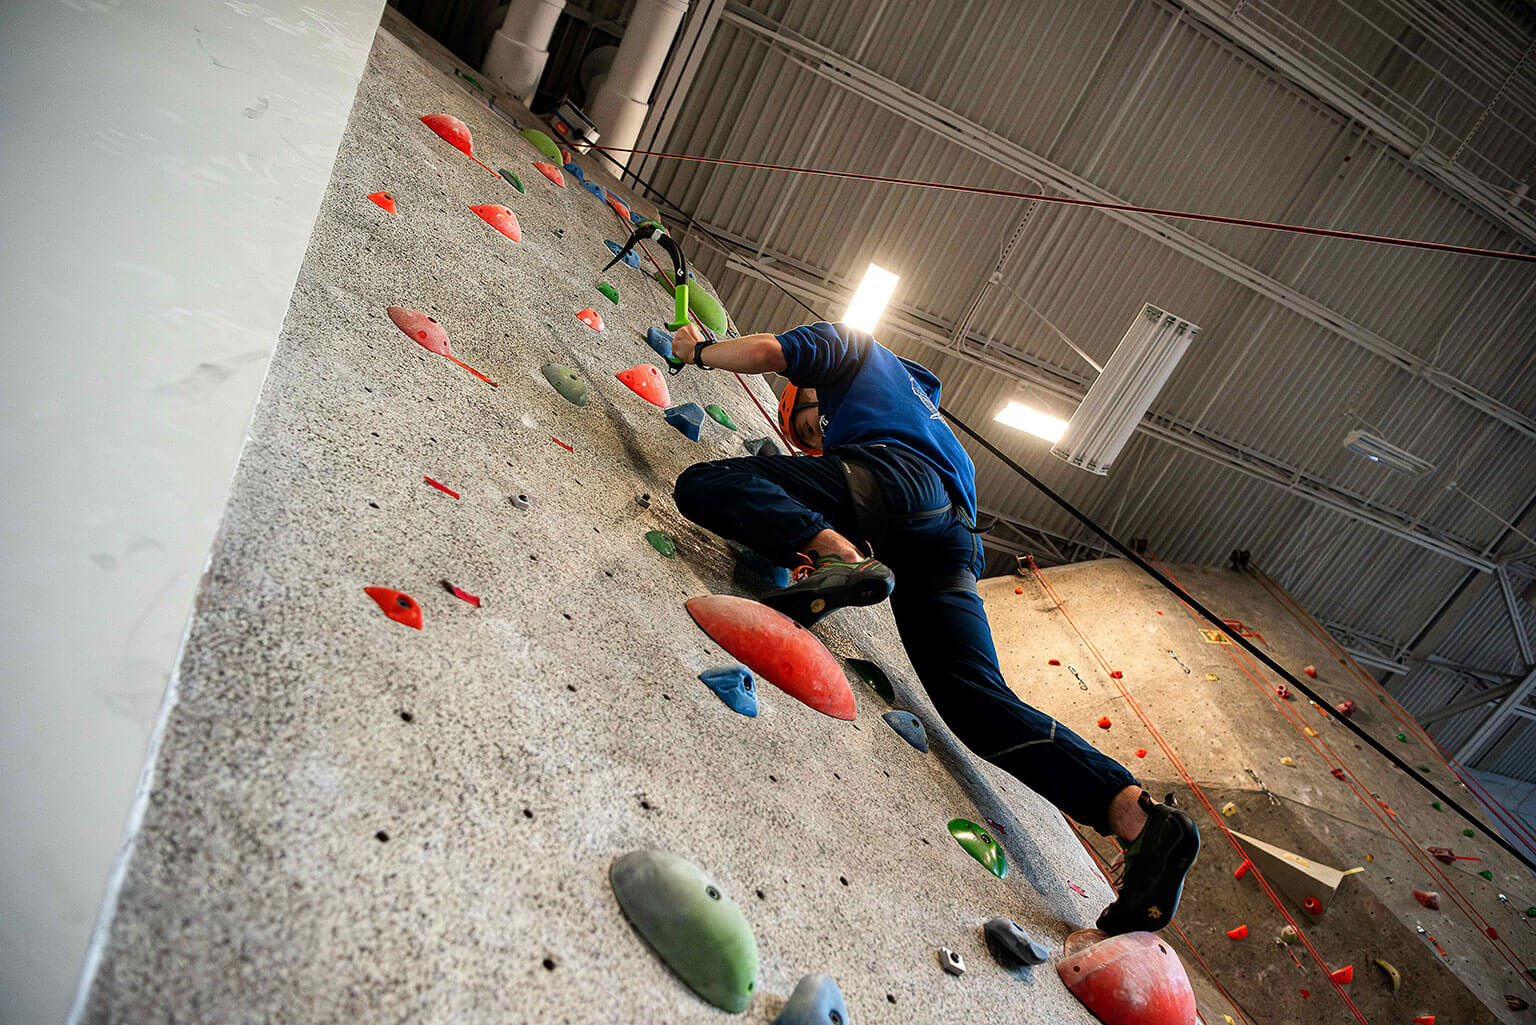 U.S. Air Force Academy Cadet 2nd Class Austin Curtis, a member of the cadet Mountaineering Club, ascends the climbing wall in the Cadet Fitness Center.